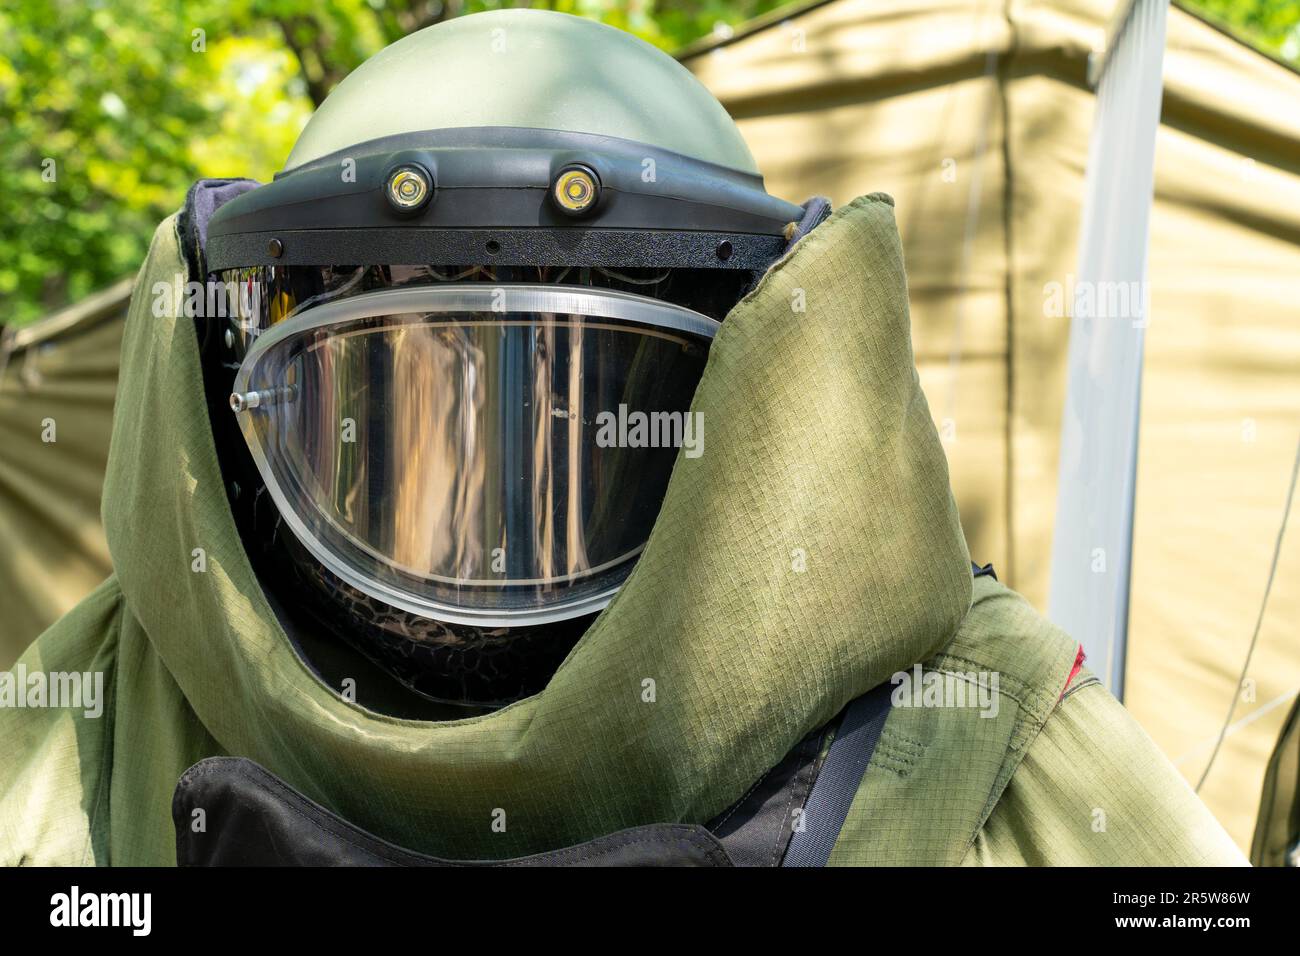 A EOD (Explosive Ordnance Disposal) military protective costume Stock Photo